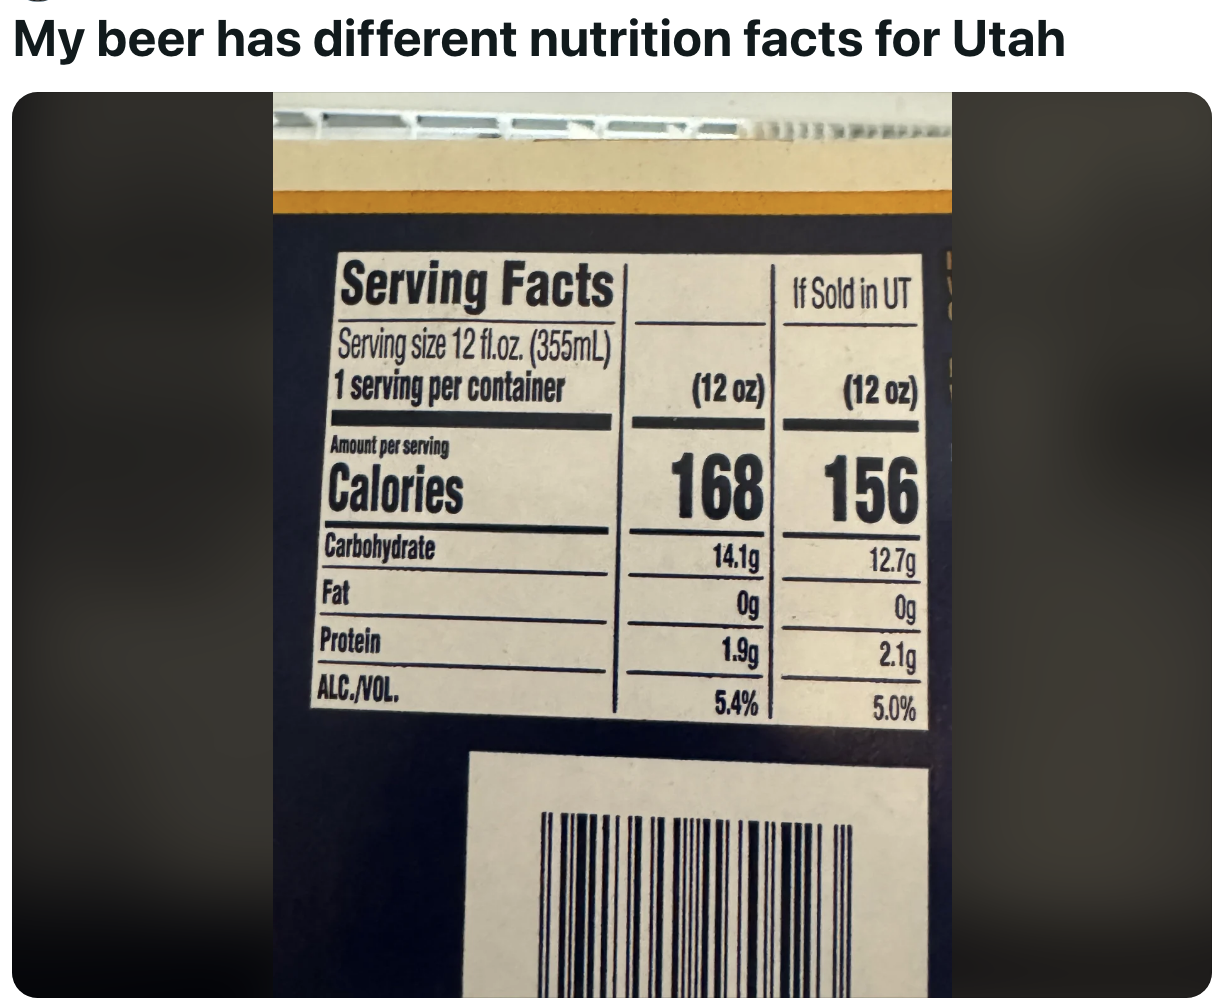 serving facts have a different row of info for when it&#x27;s sold in Utah